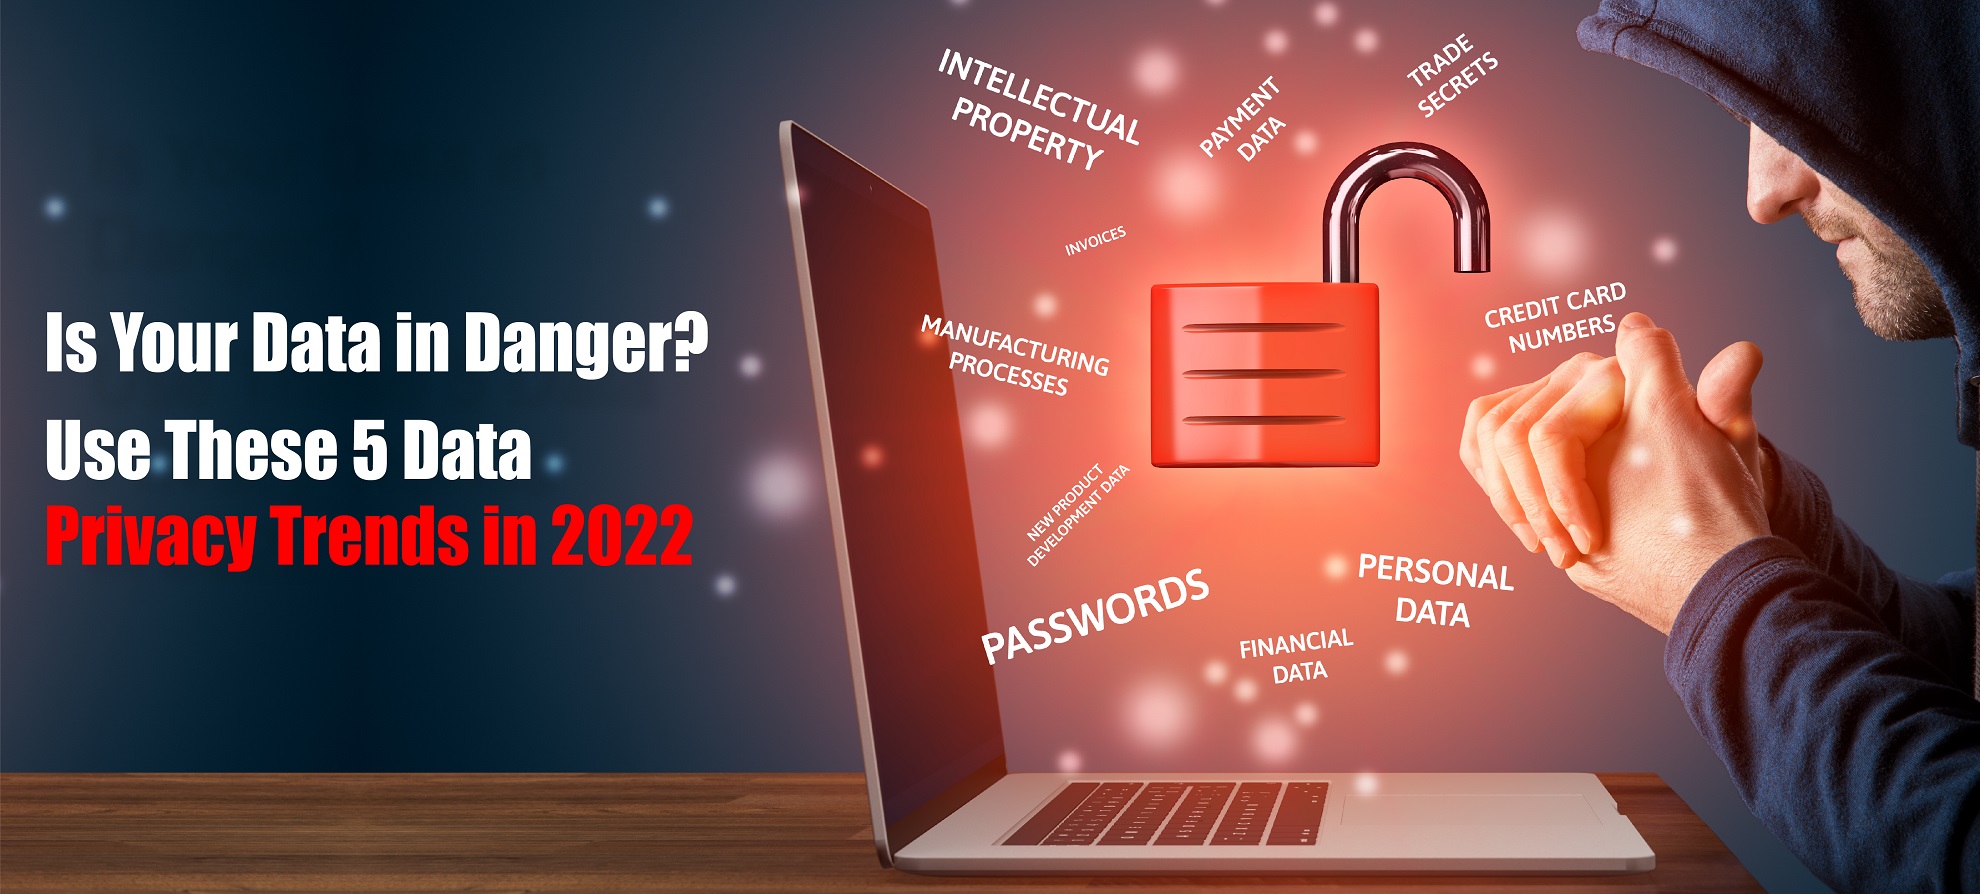 Is Your Data in Danger? Use These 5 Data Privacy Trends in 2022